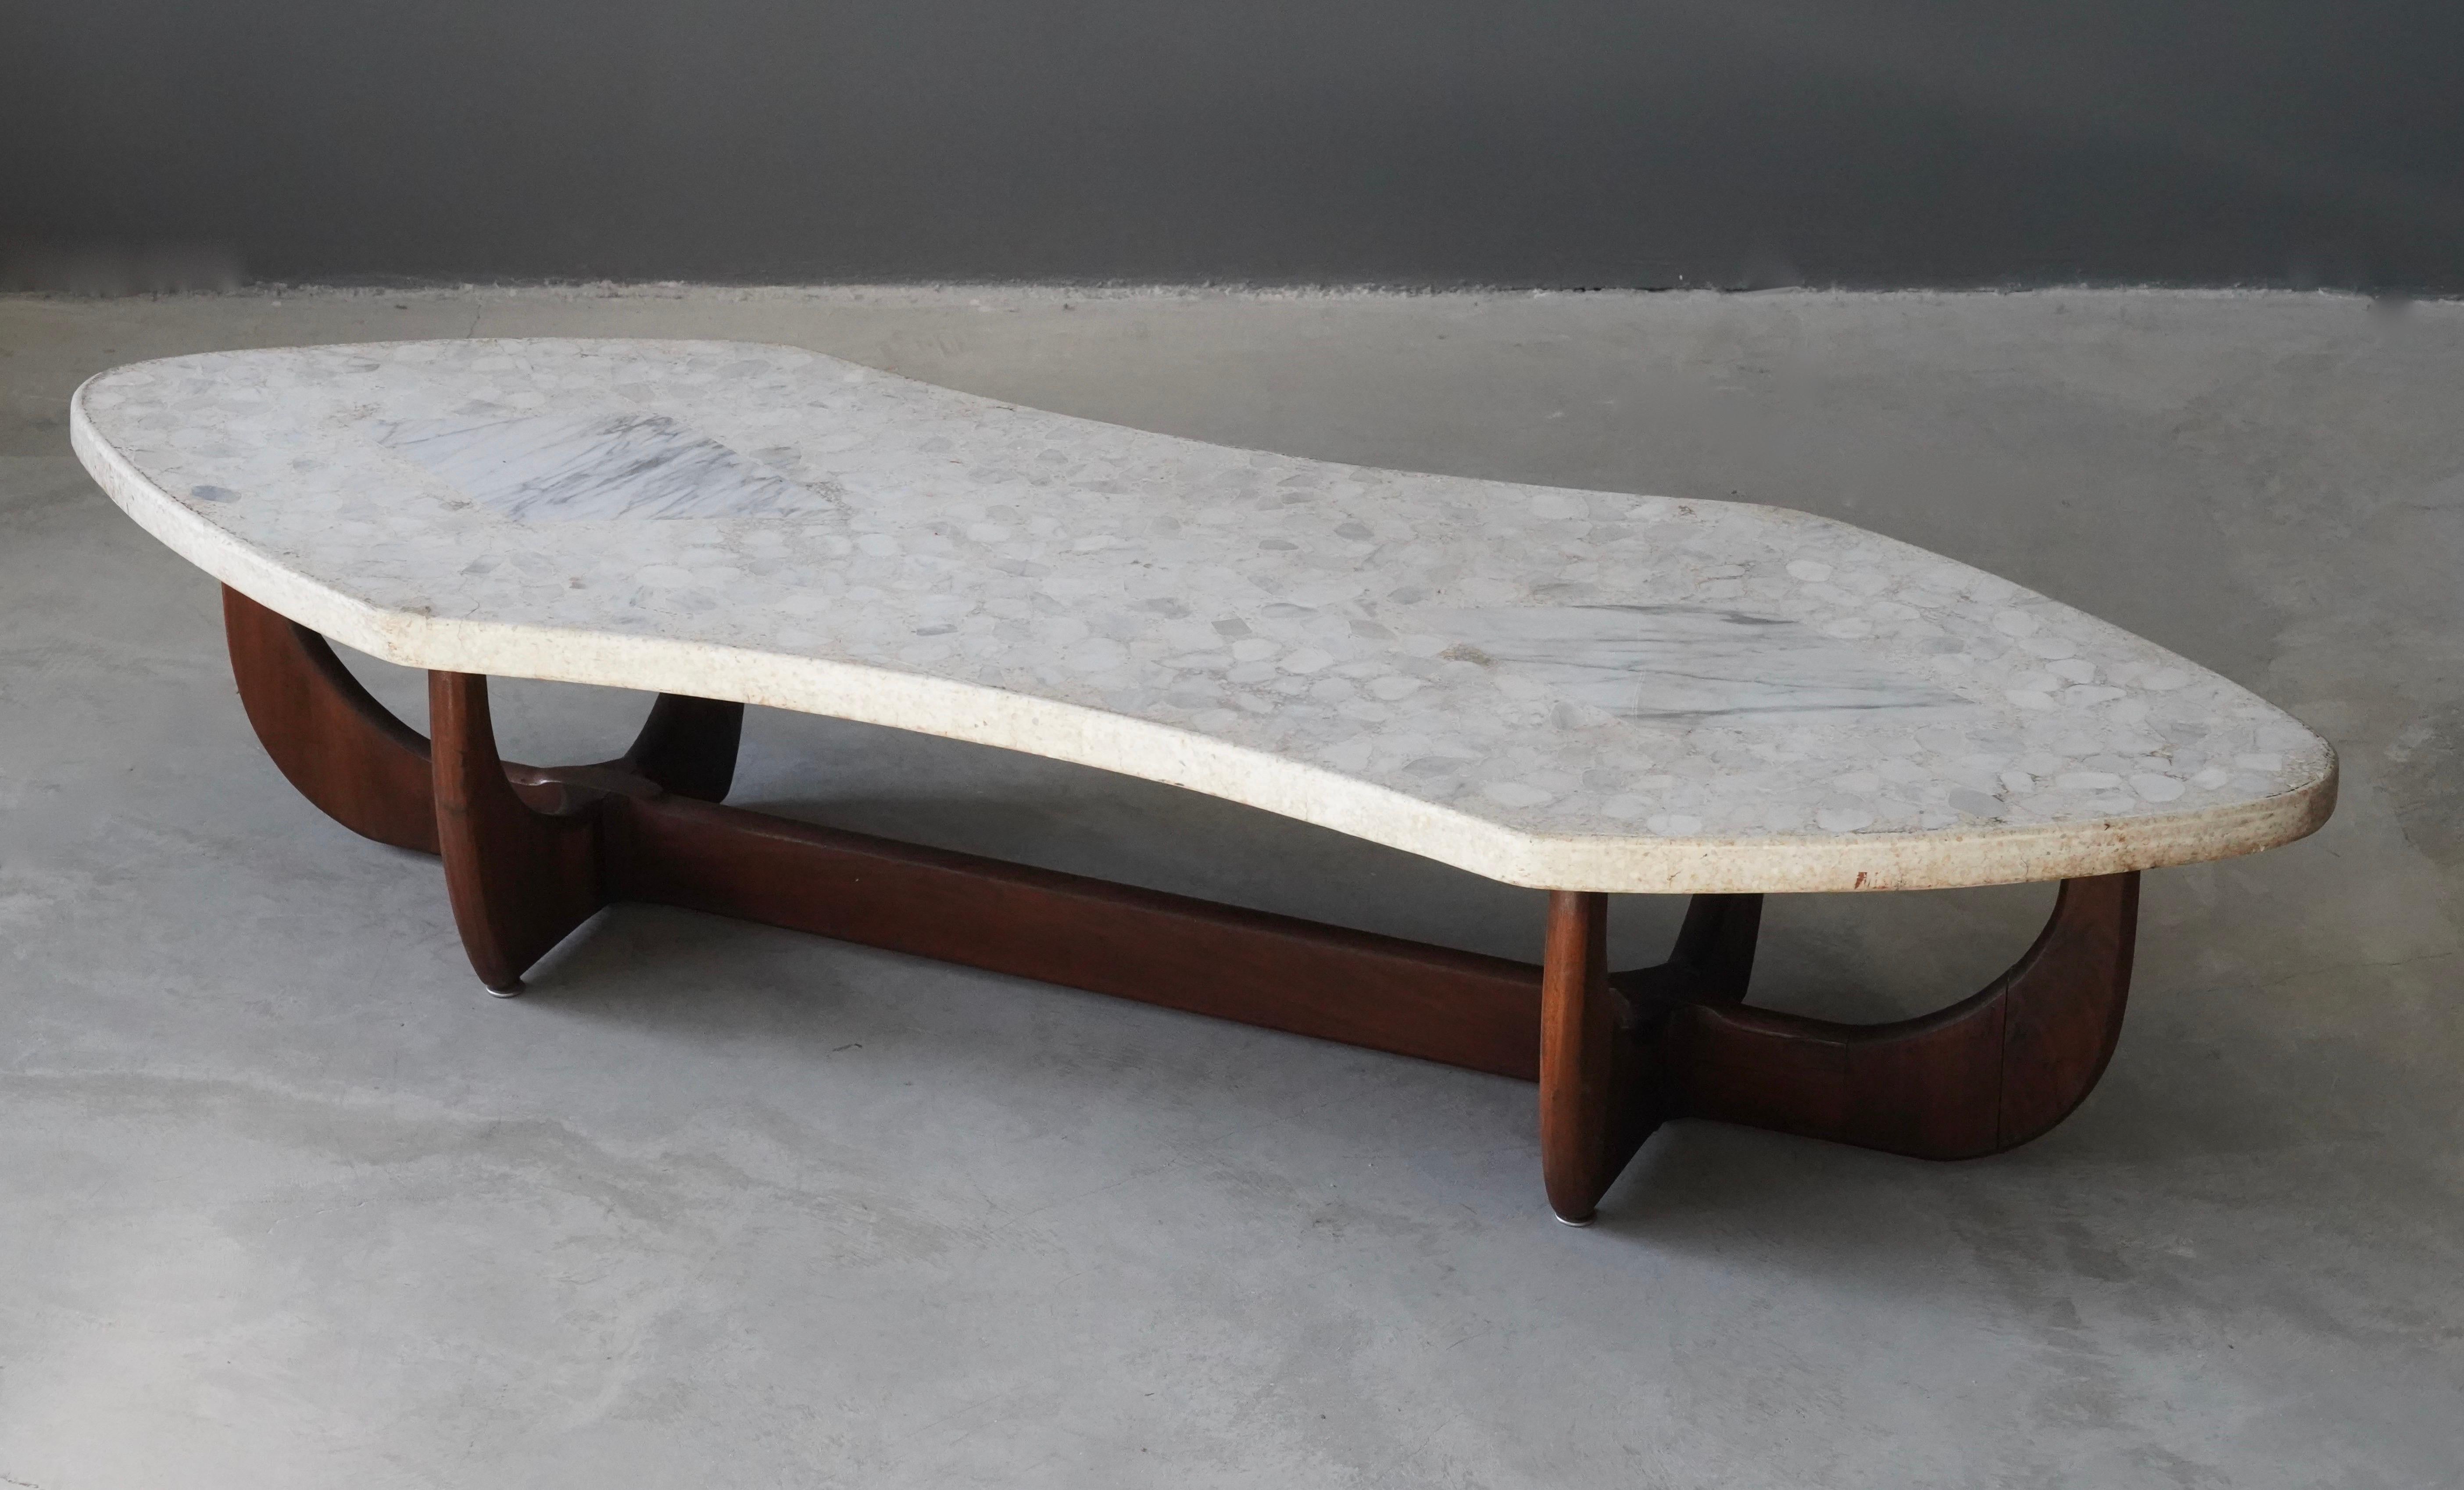 A sculptural coffee table / cocktail table. Designed and produced in America, 1950s. Stone top consisting of terrazzo with Carrara marble inlays, rests on a finely sculpted walnut base. 

Other designers of the period include Paul Frankl, Harvey